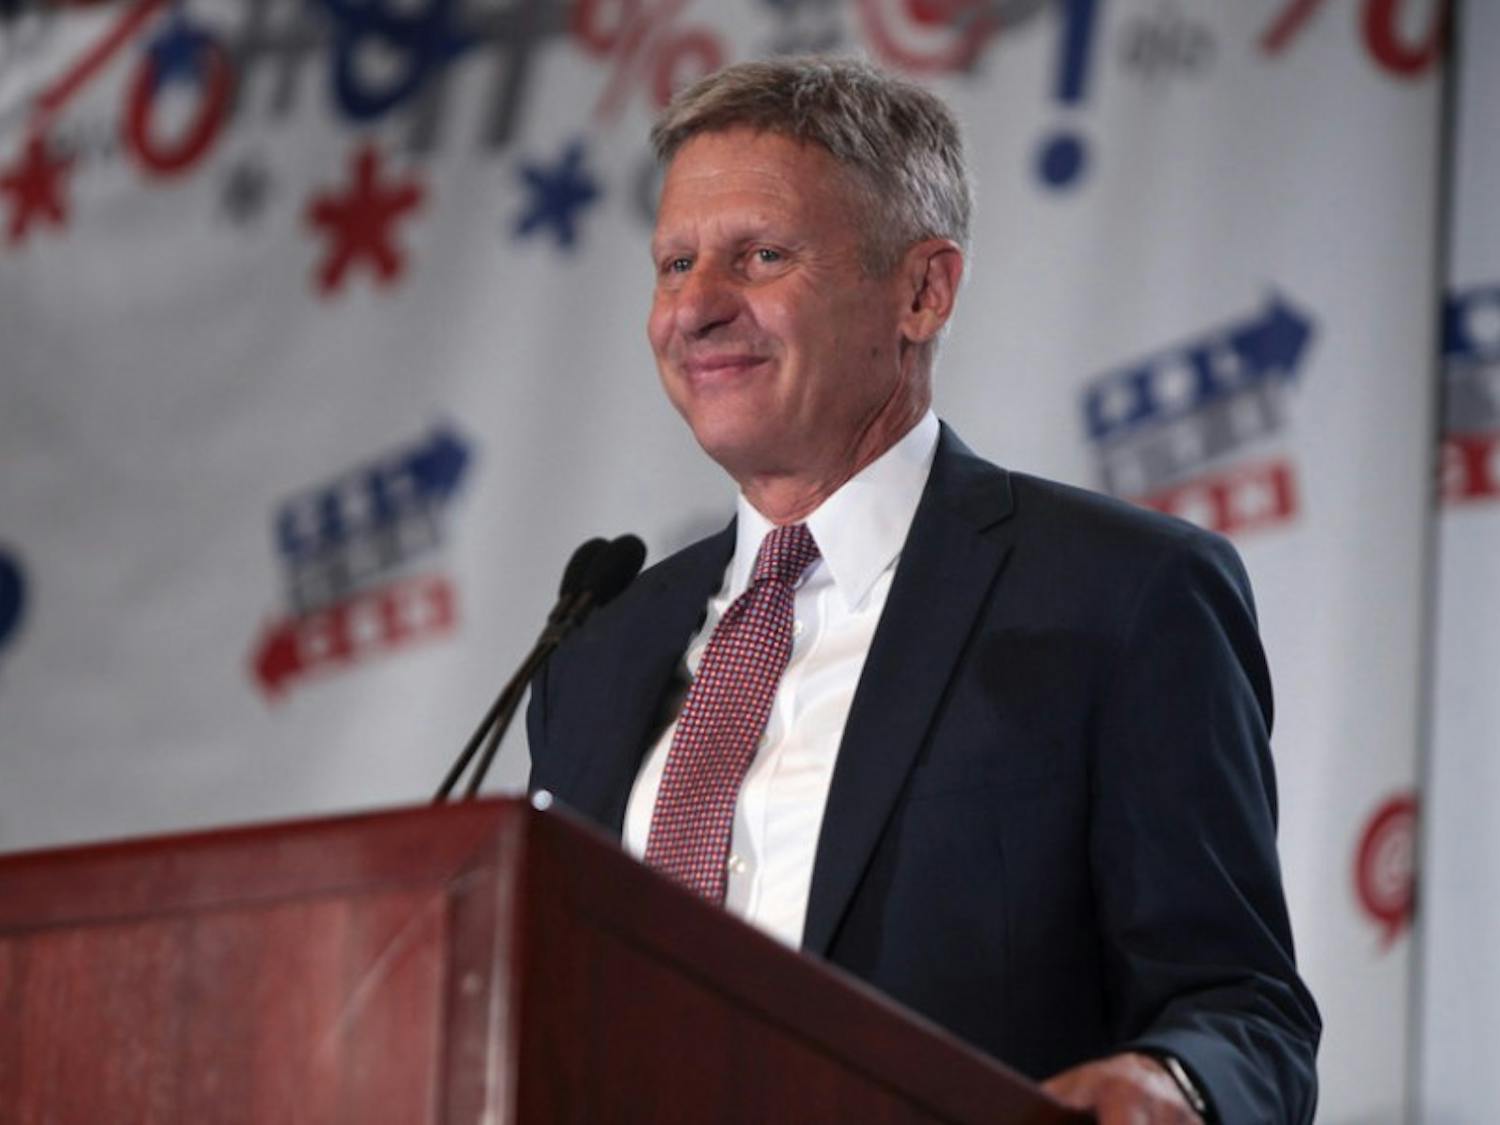 Gary Johnson is the Libertarian Party nominee for the presidential election this November.